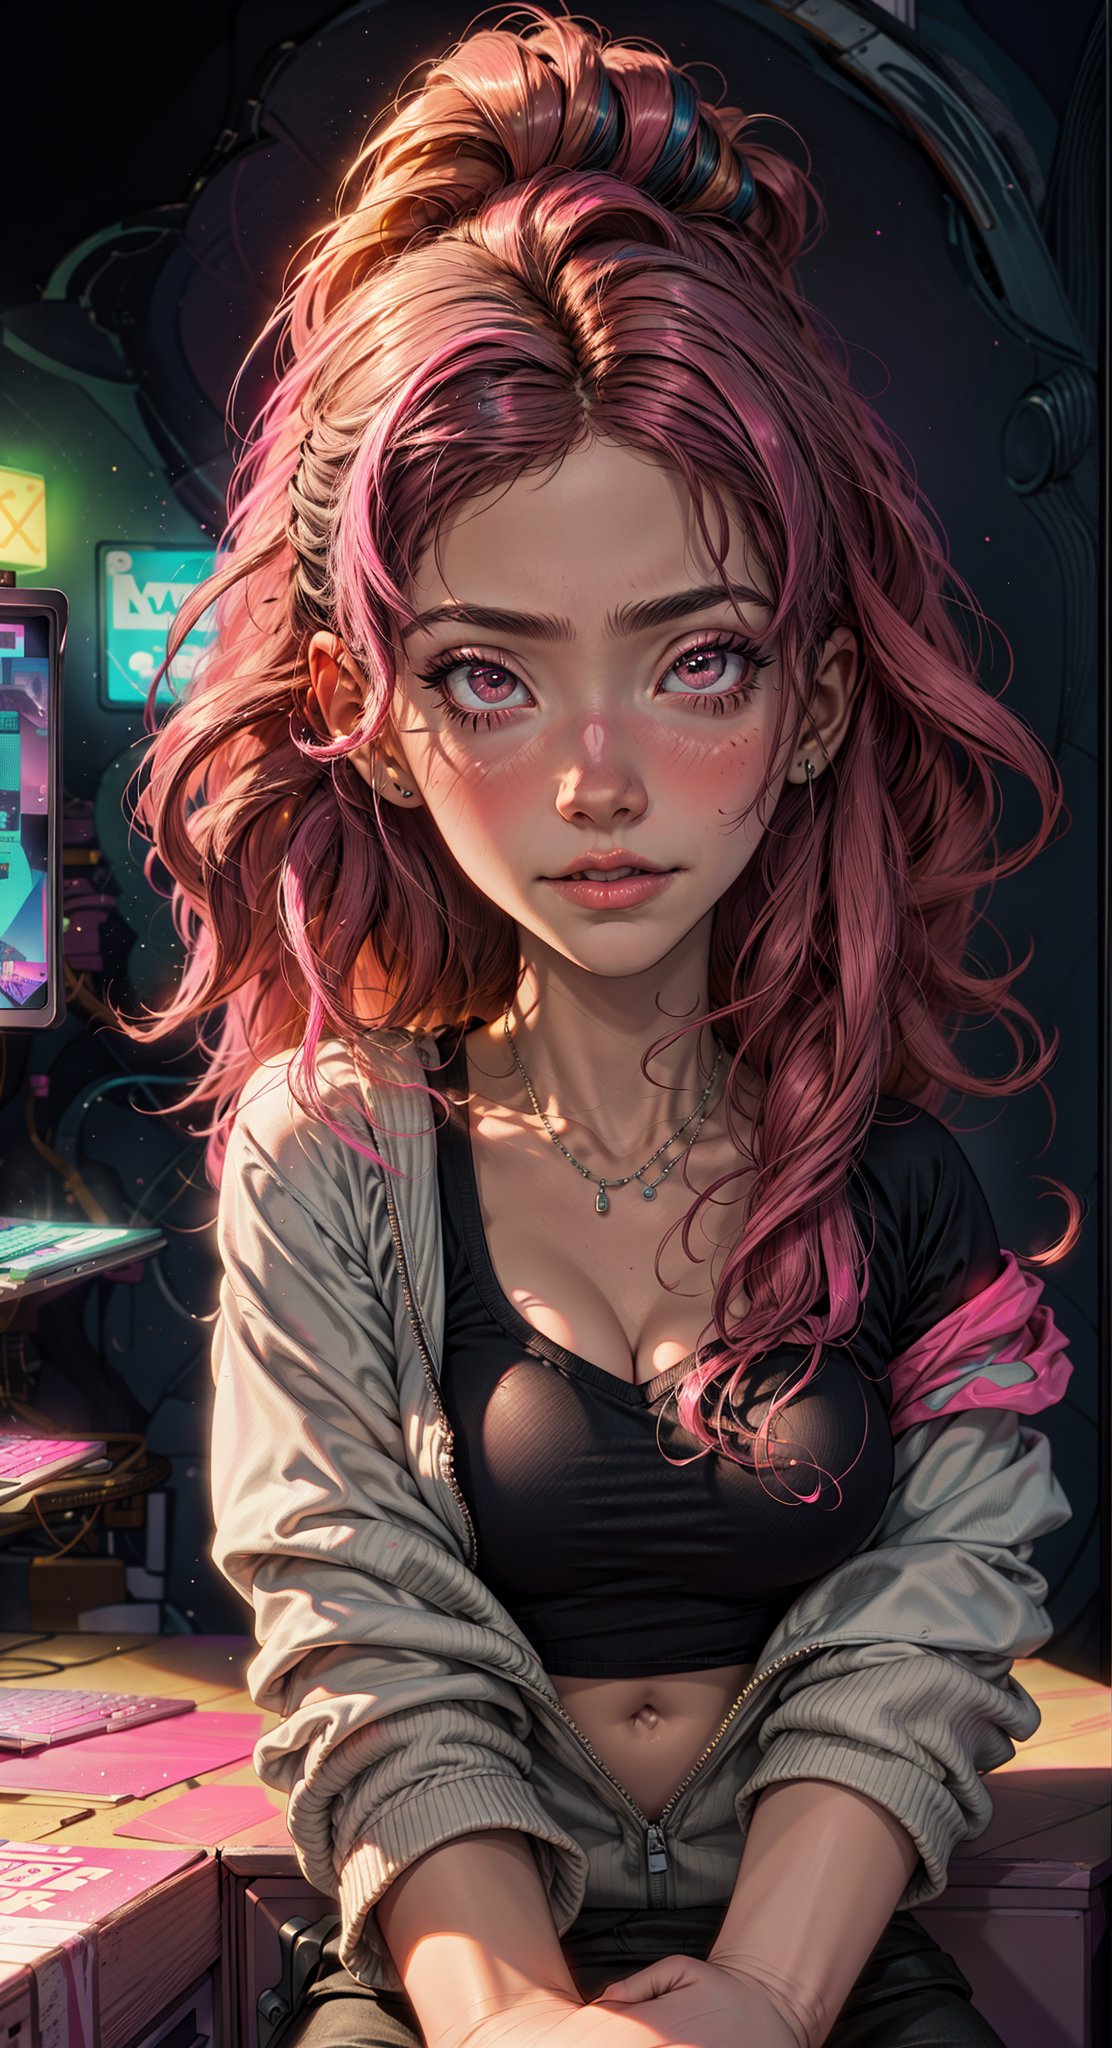 FRONTAL VIEW Image of an /(Upper body portrait of a beautiful girl with pink hair), pink gradient synthwave room, Perfectly drawn Fingers, (sitting close to a pink desk), pink gradient Lighting , Centered Image, Middle Image, zen Interior design, volumetric color , flaming colors, neon pink colors, cosmos, cyber, synthwave, wearing a white t-shirt and black jacket, SFW,